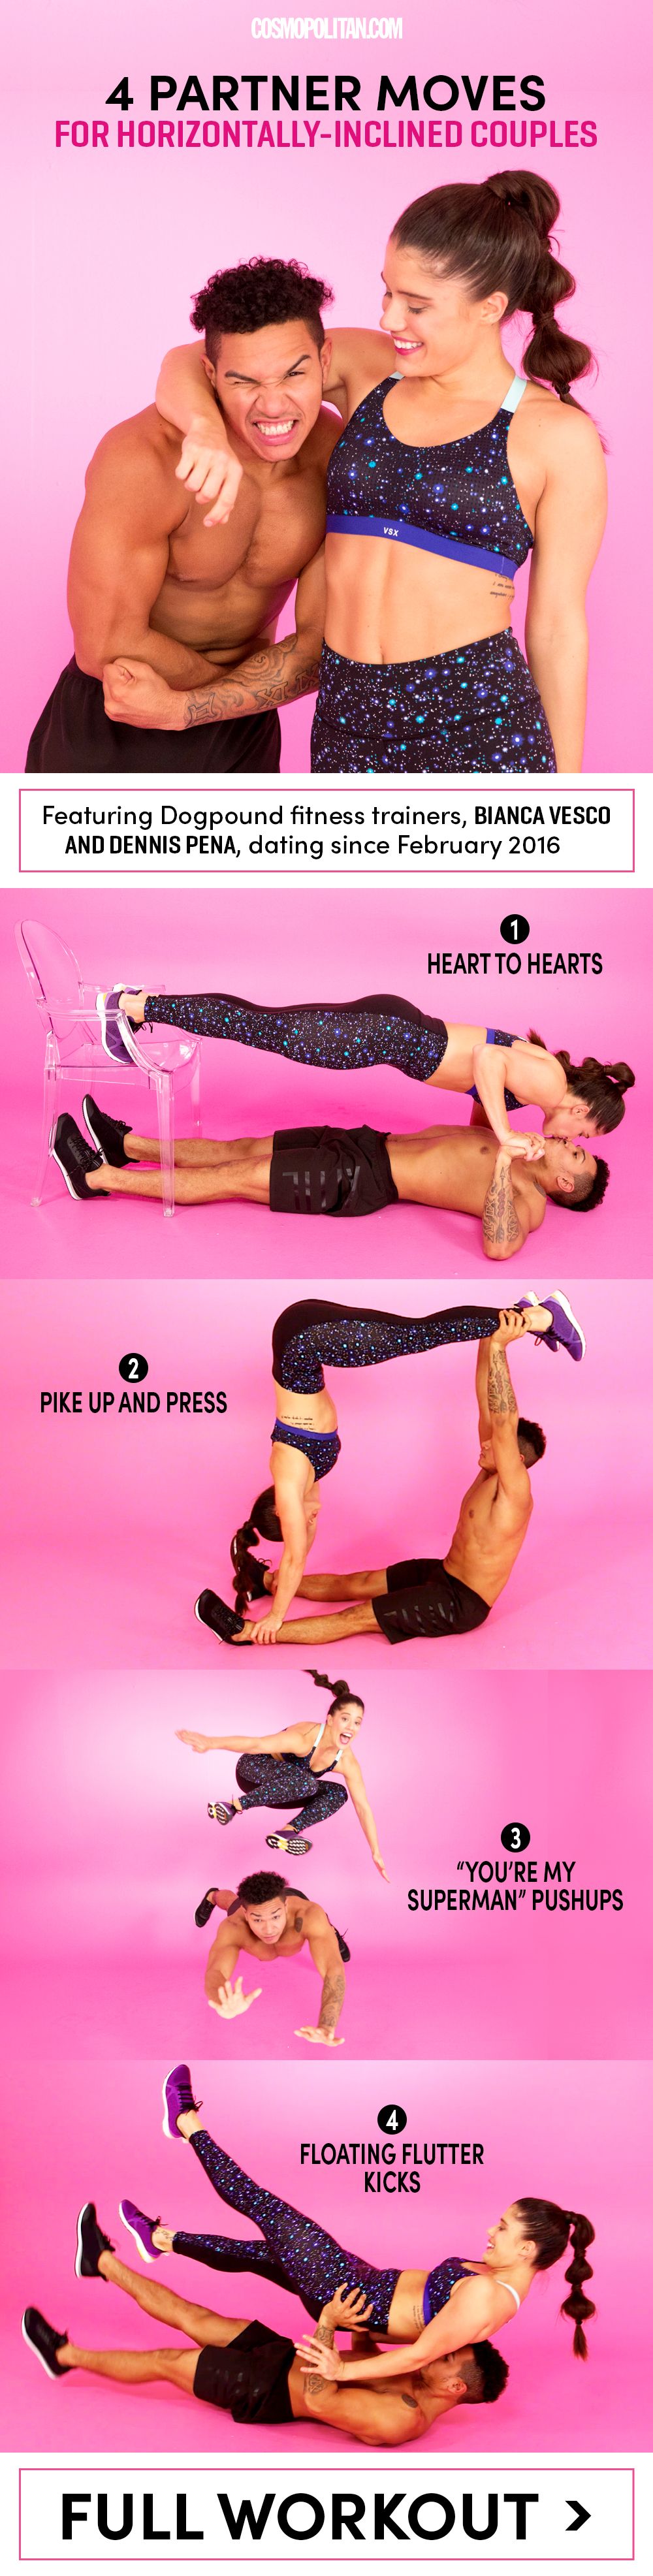 HIIT Partner Workout. Couple Workout you can do anywhere! No